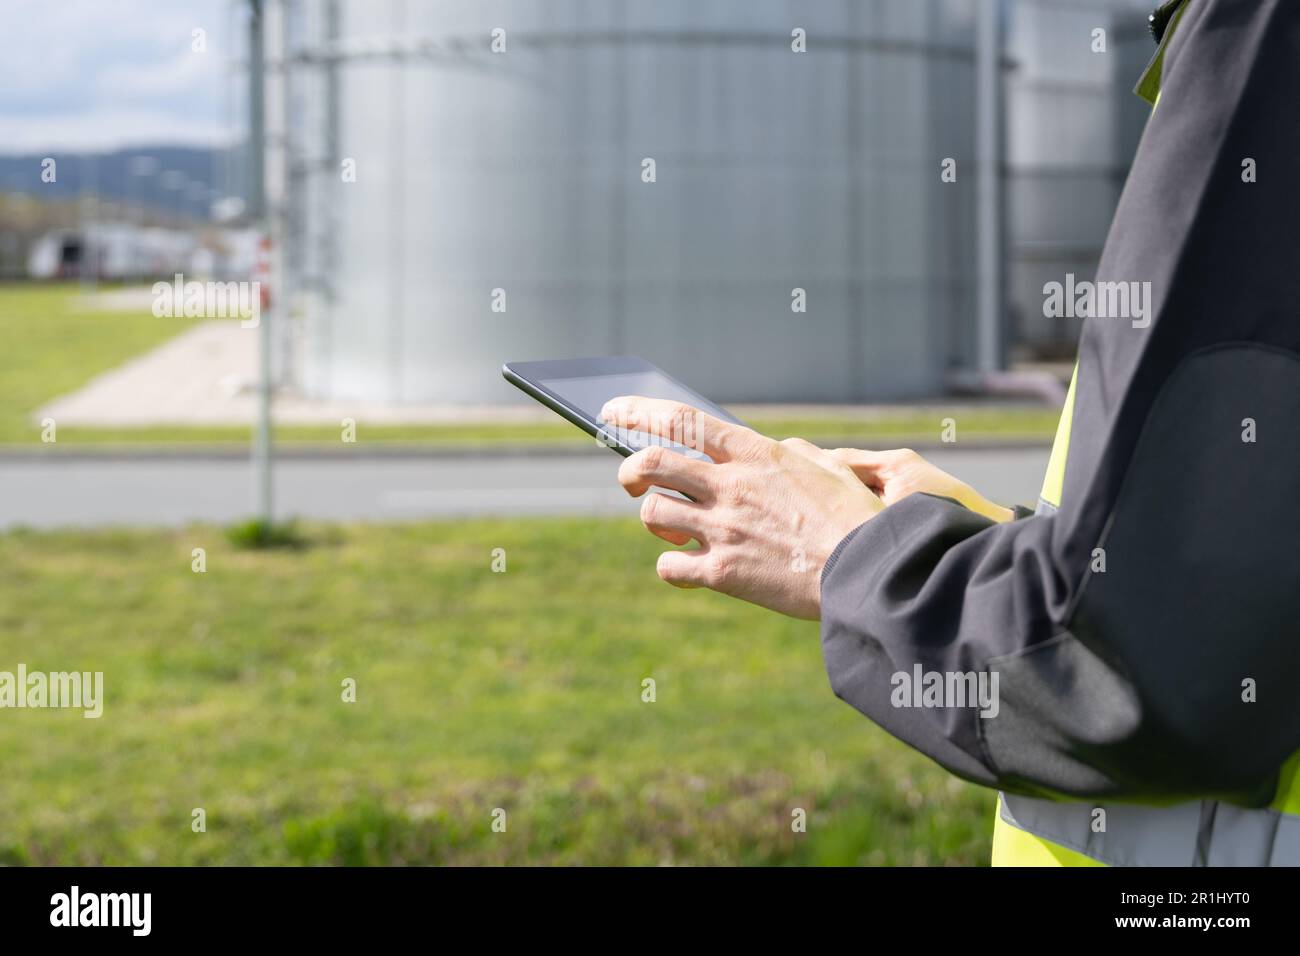 Engineer with digital tablet on a background of gas tanks. High quality photo Stock Photo